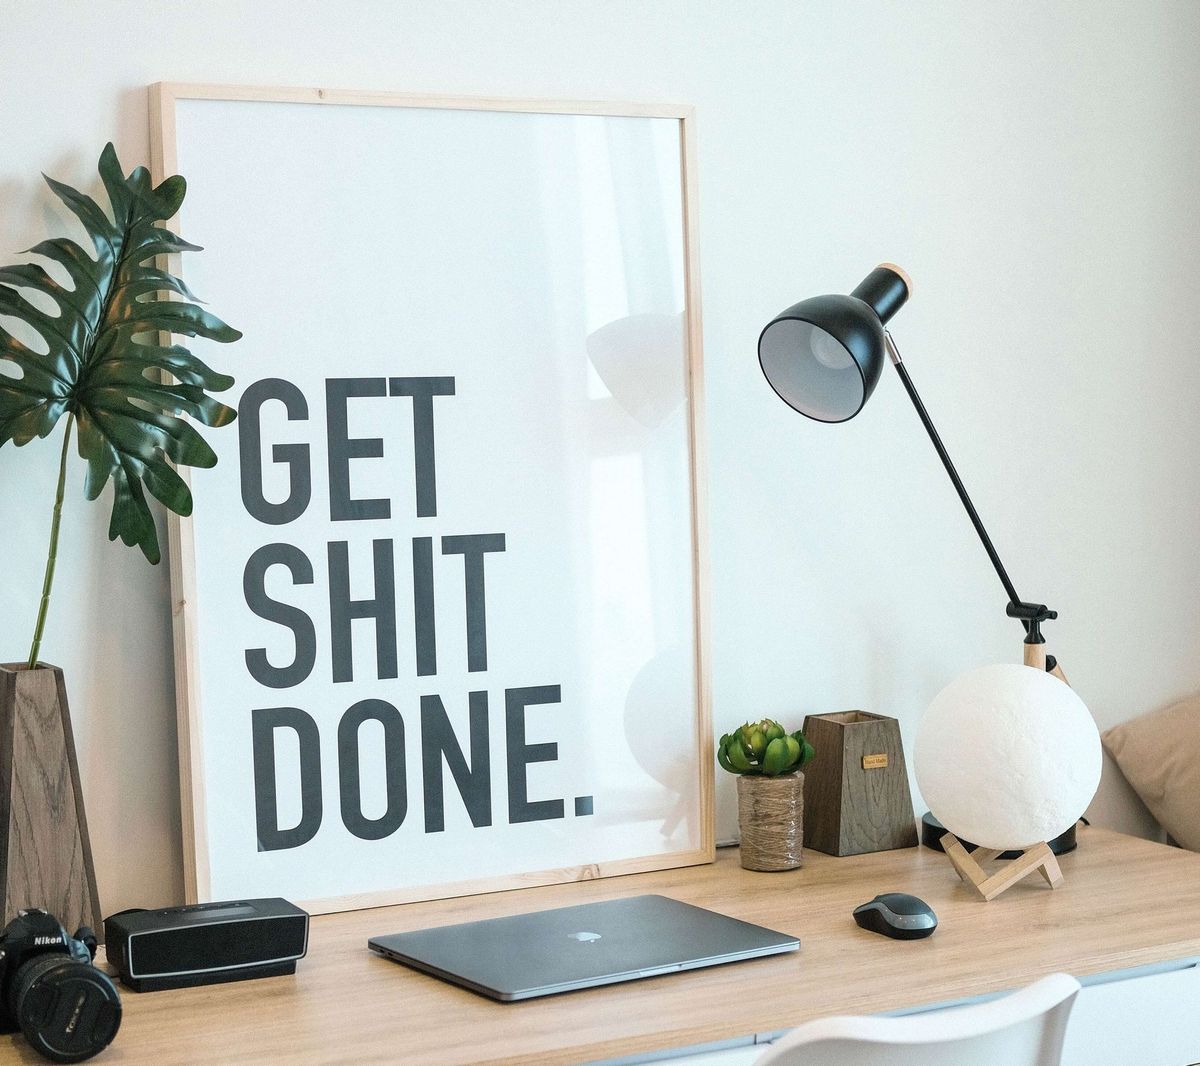 Seven productivity tips for working from home efficiently